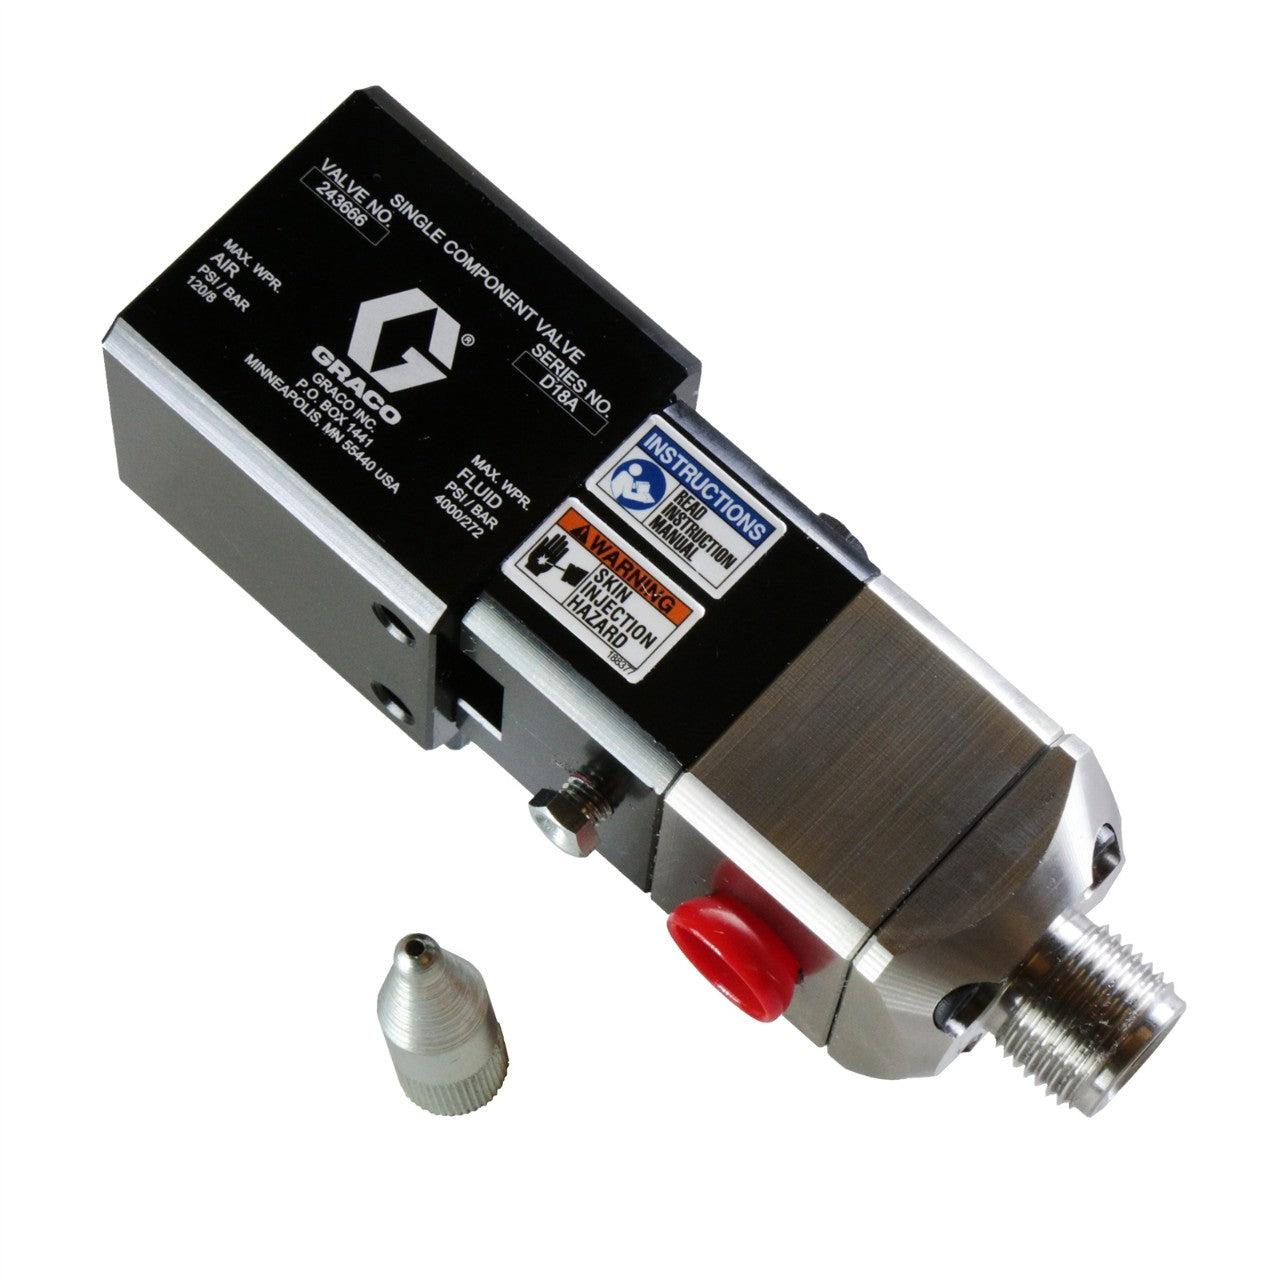 1k Ultra-Lite Dispense Valve with 45° Connection